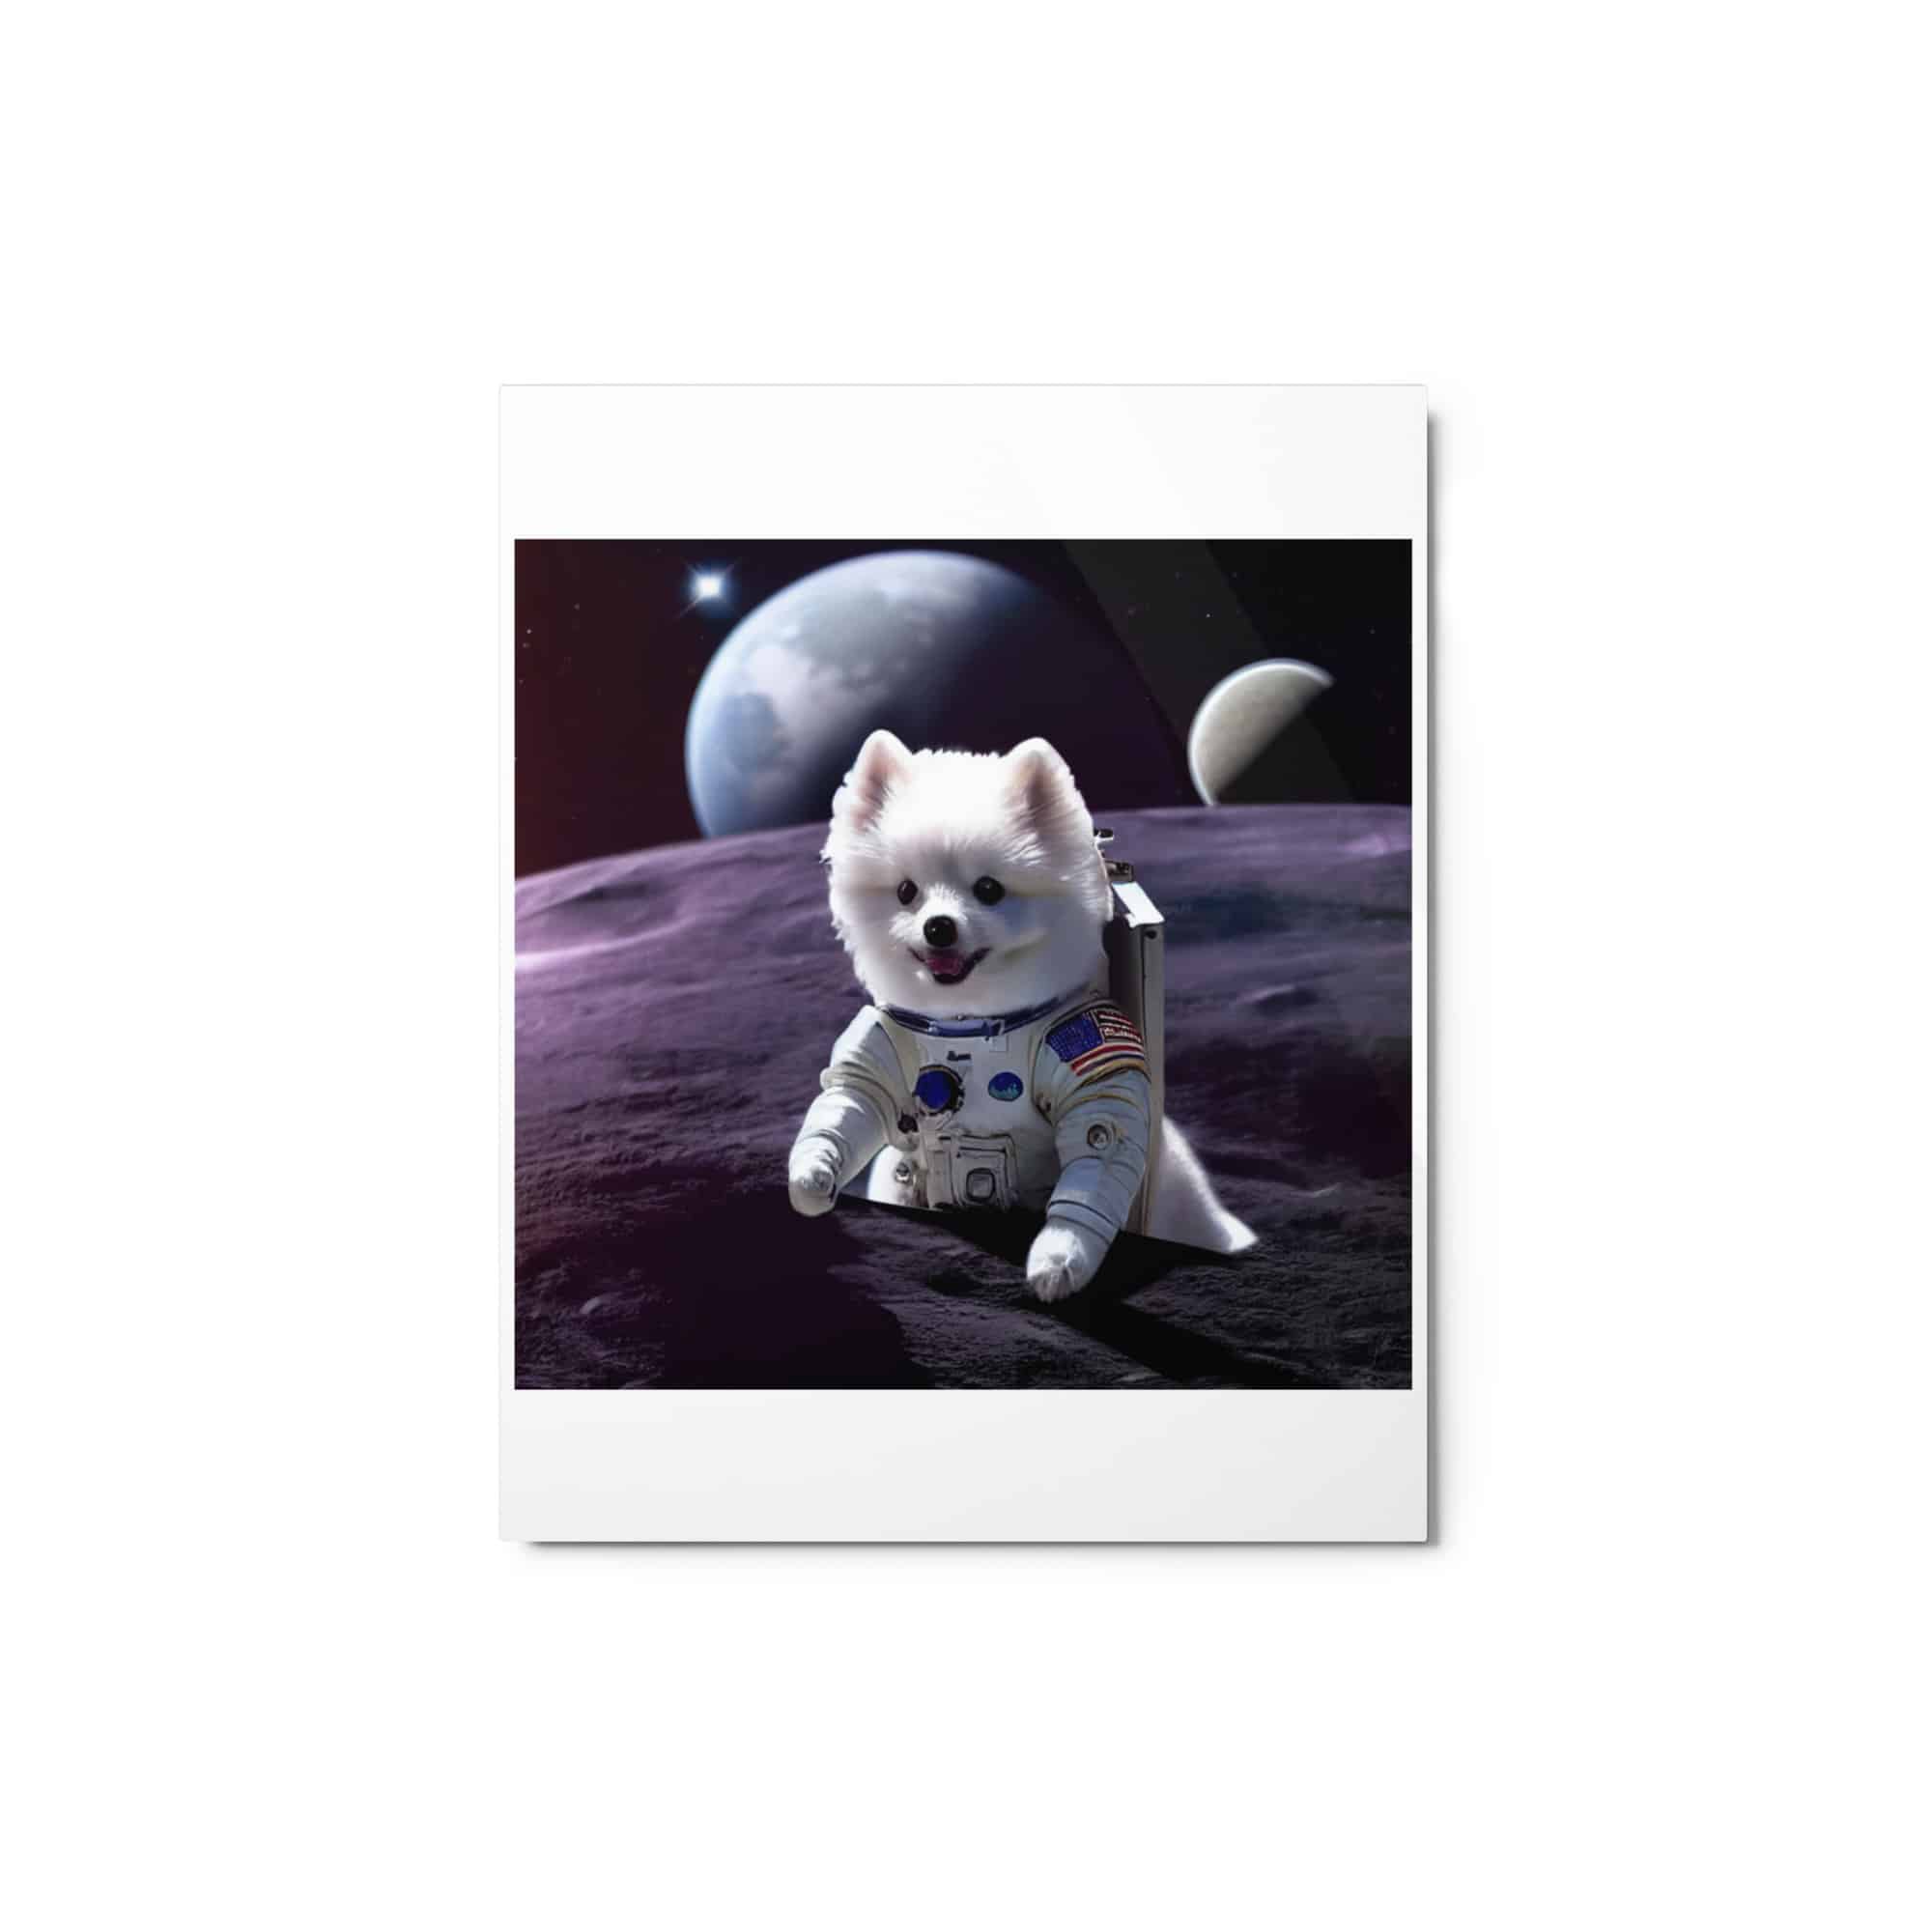 METAL PRINT 1:11 Marshmello ( @cryptopup, First Dog Character To Return To The Moon Since 1969) Bonus 1:11 NFT ( Mint Date April 8th, 2023)